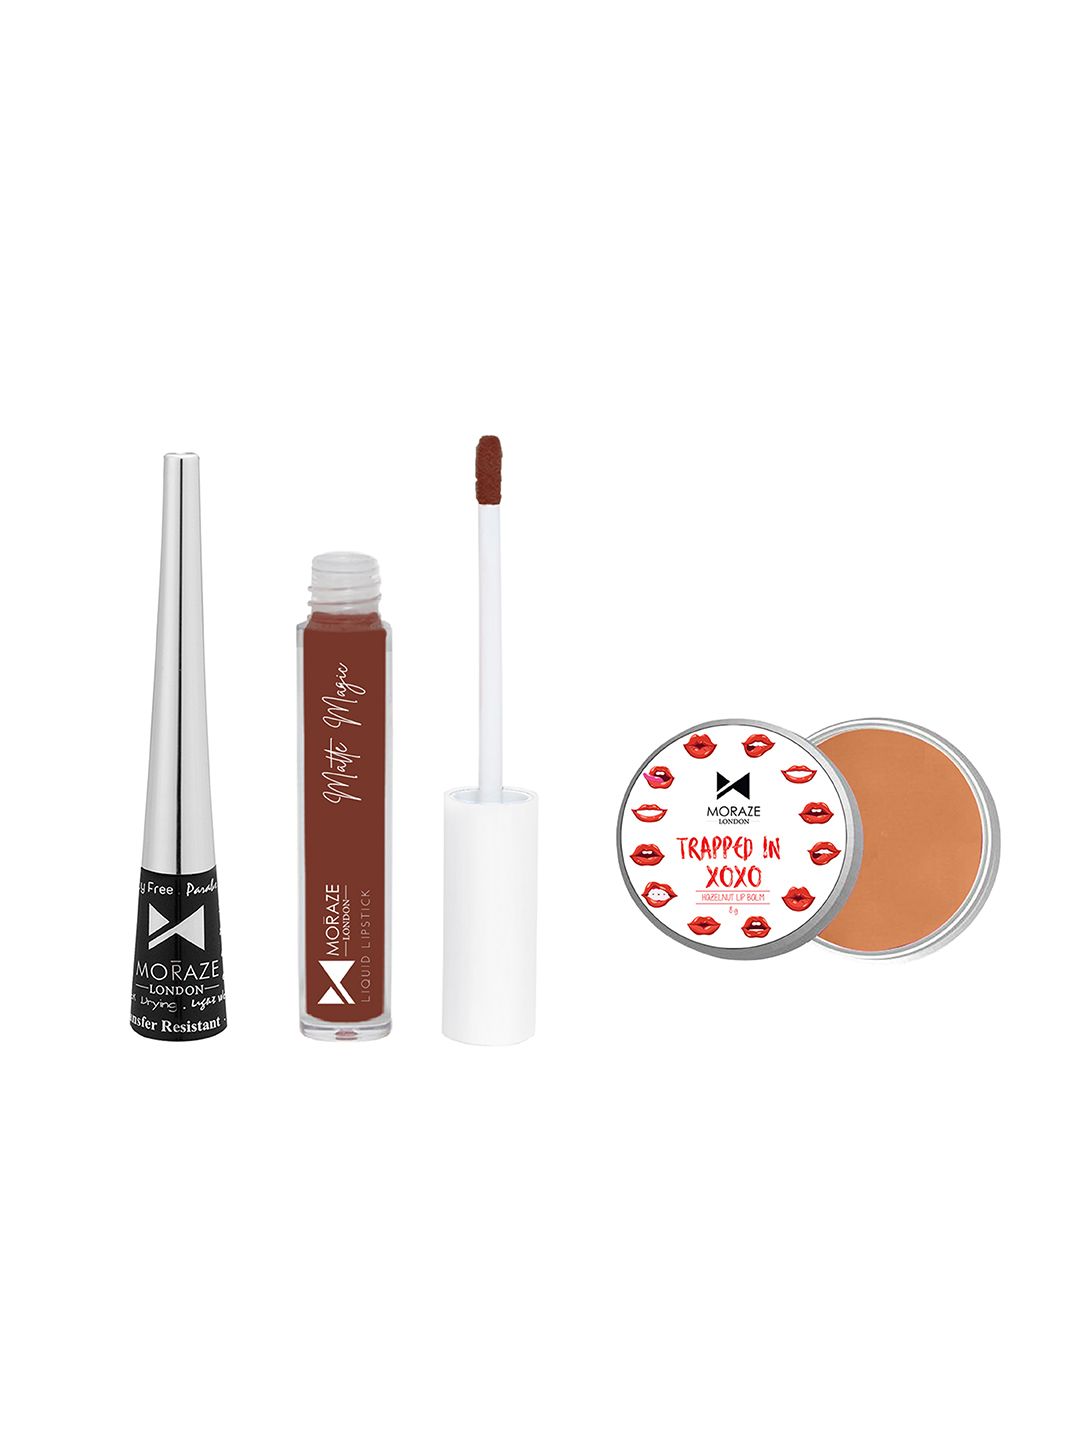 Moraze Combo Pack Of 1 Lipstick With 1 Eyeliner And 1 Lip Balm Price in India